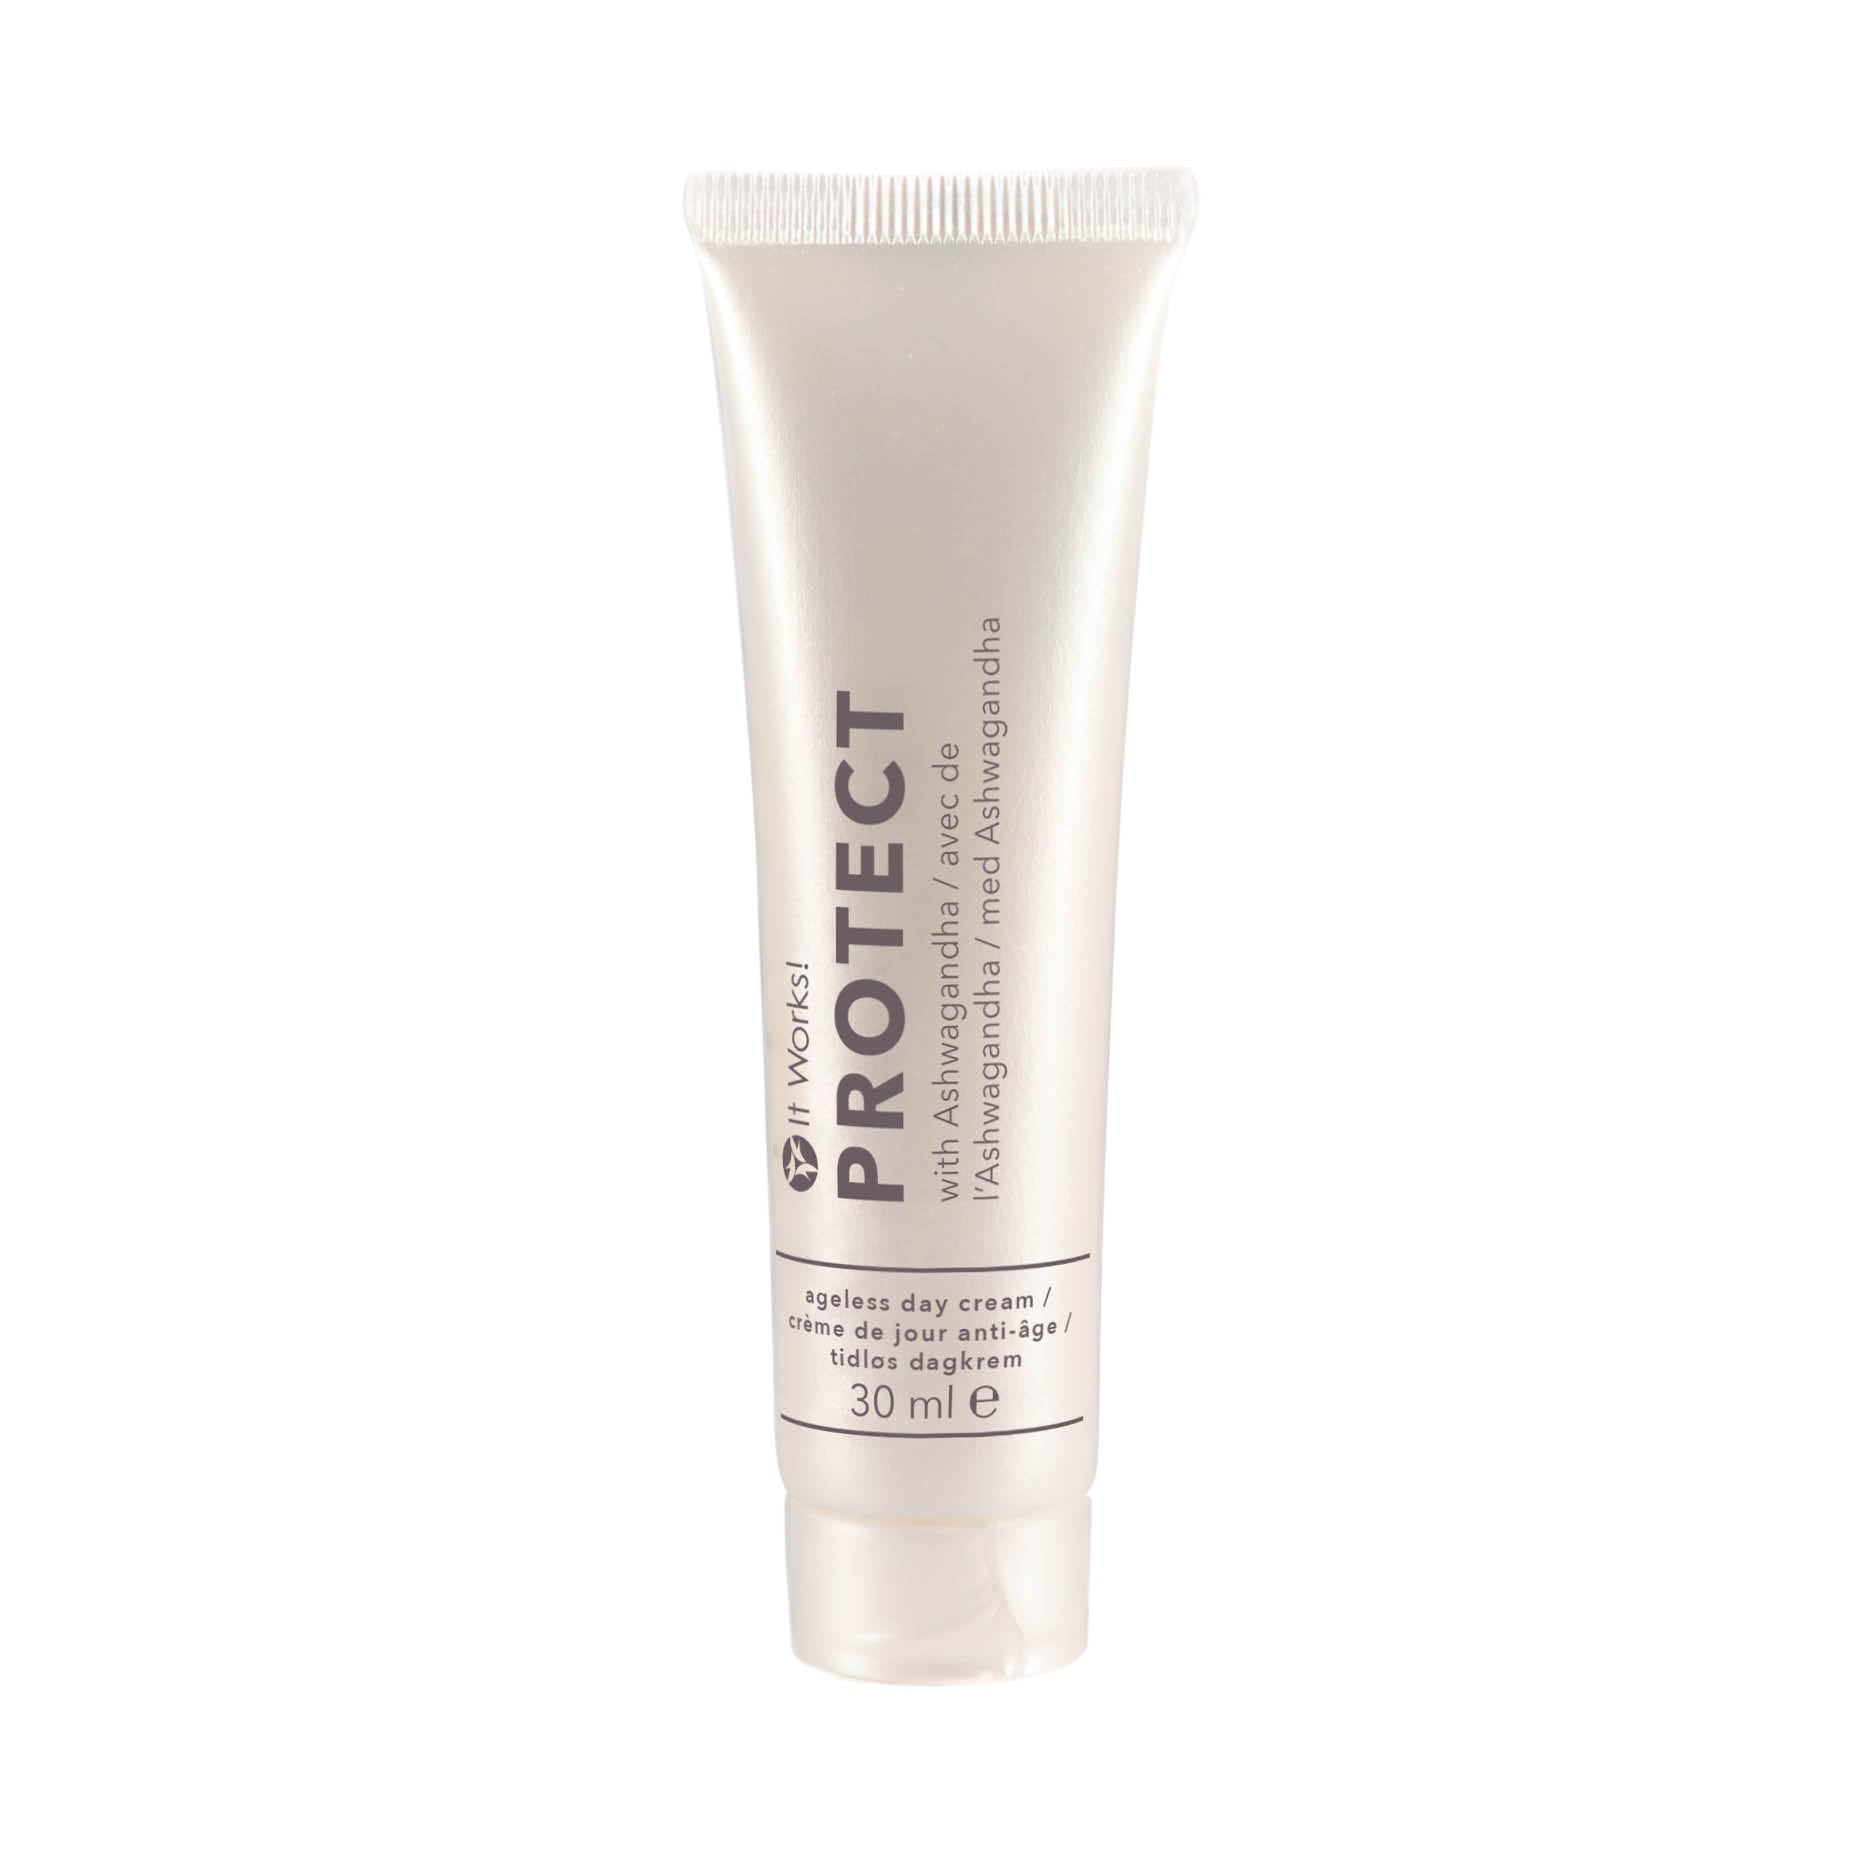 Protect - It works day cream